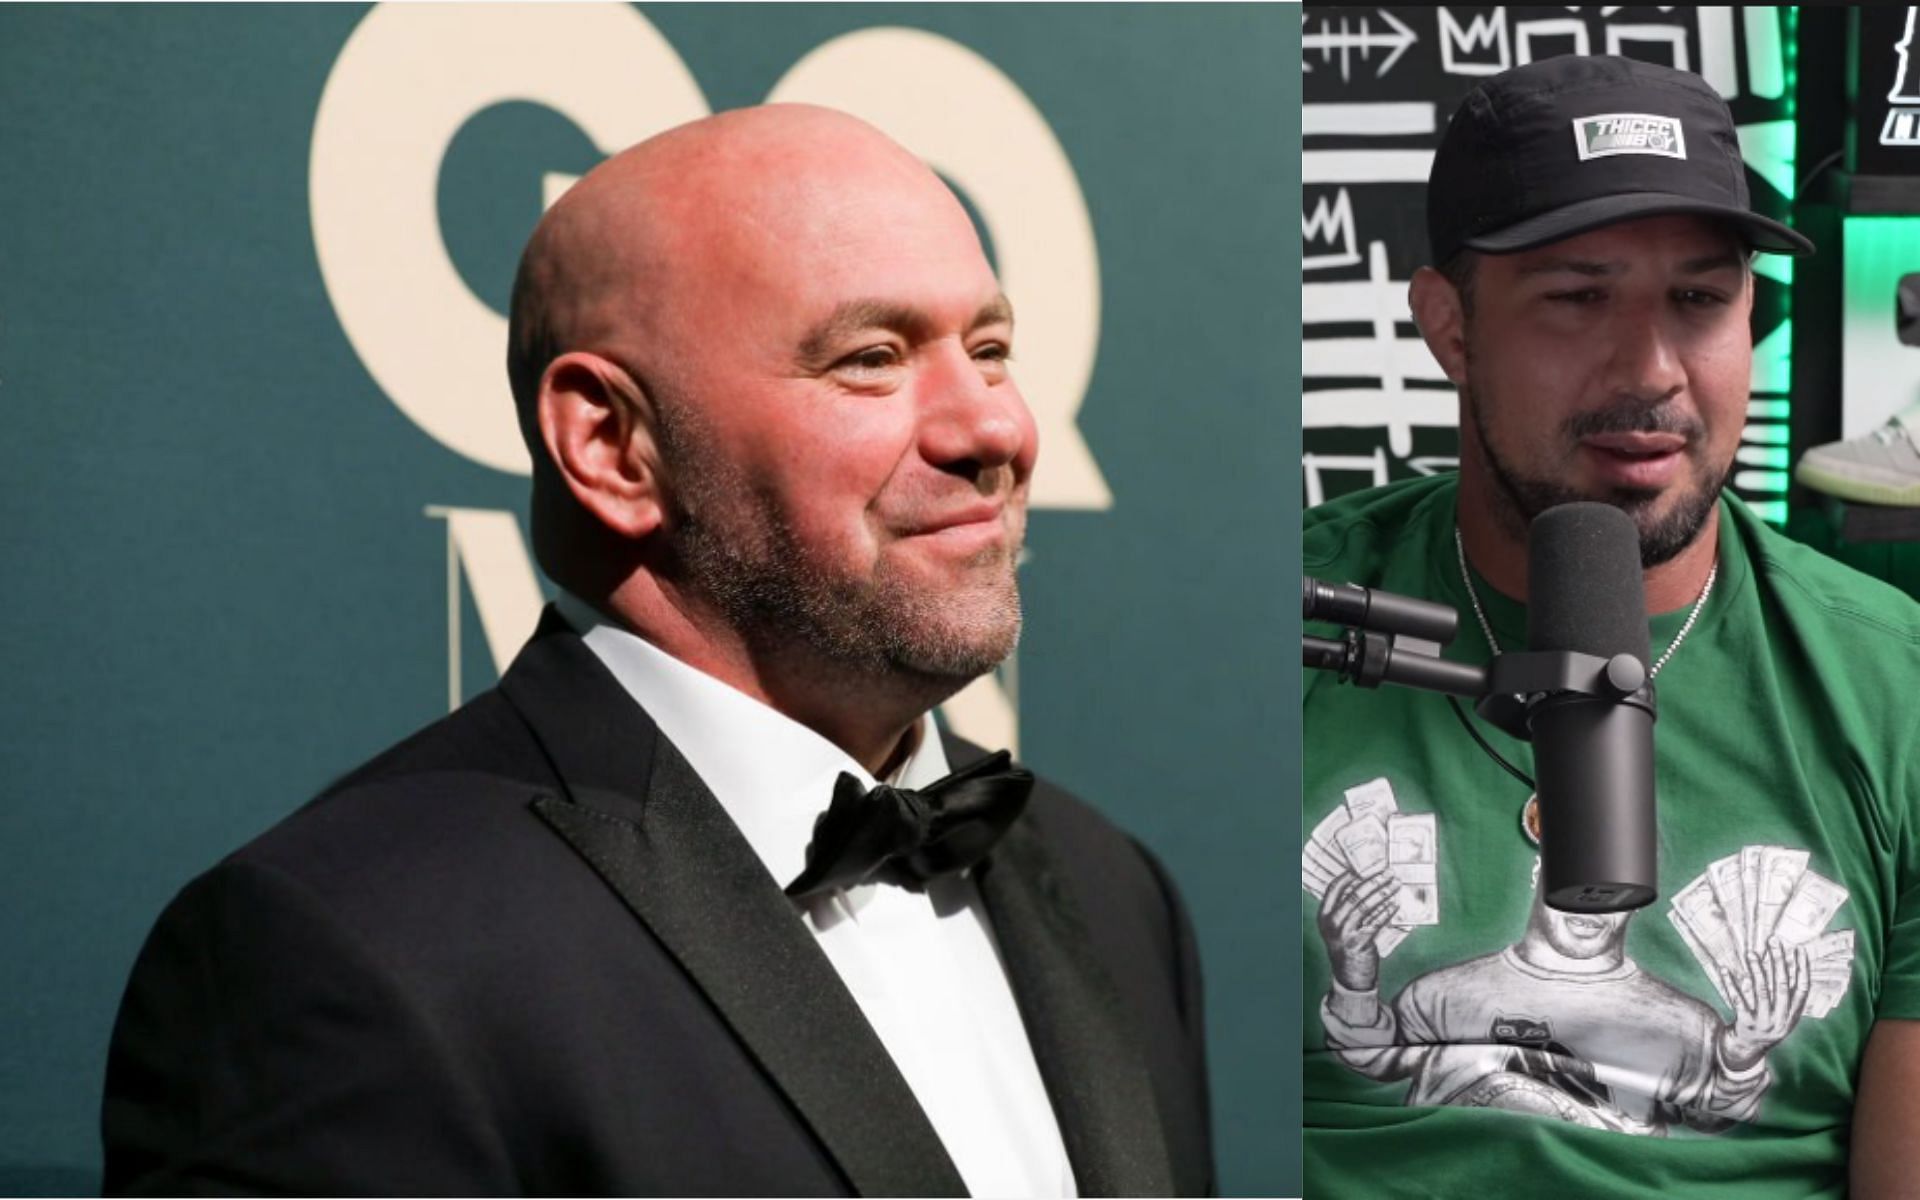 Dana White (left) and Brendan Schaub (right). [Images courtesy: left image from Getty Images and right image from YouTube Thiccc Boy]